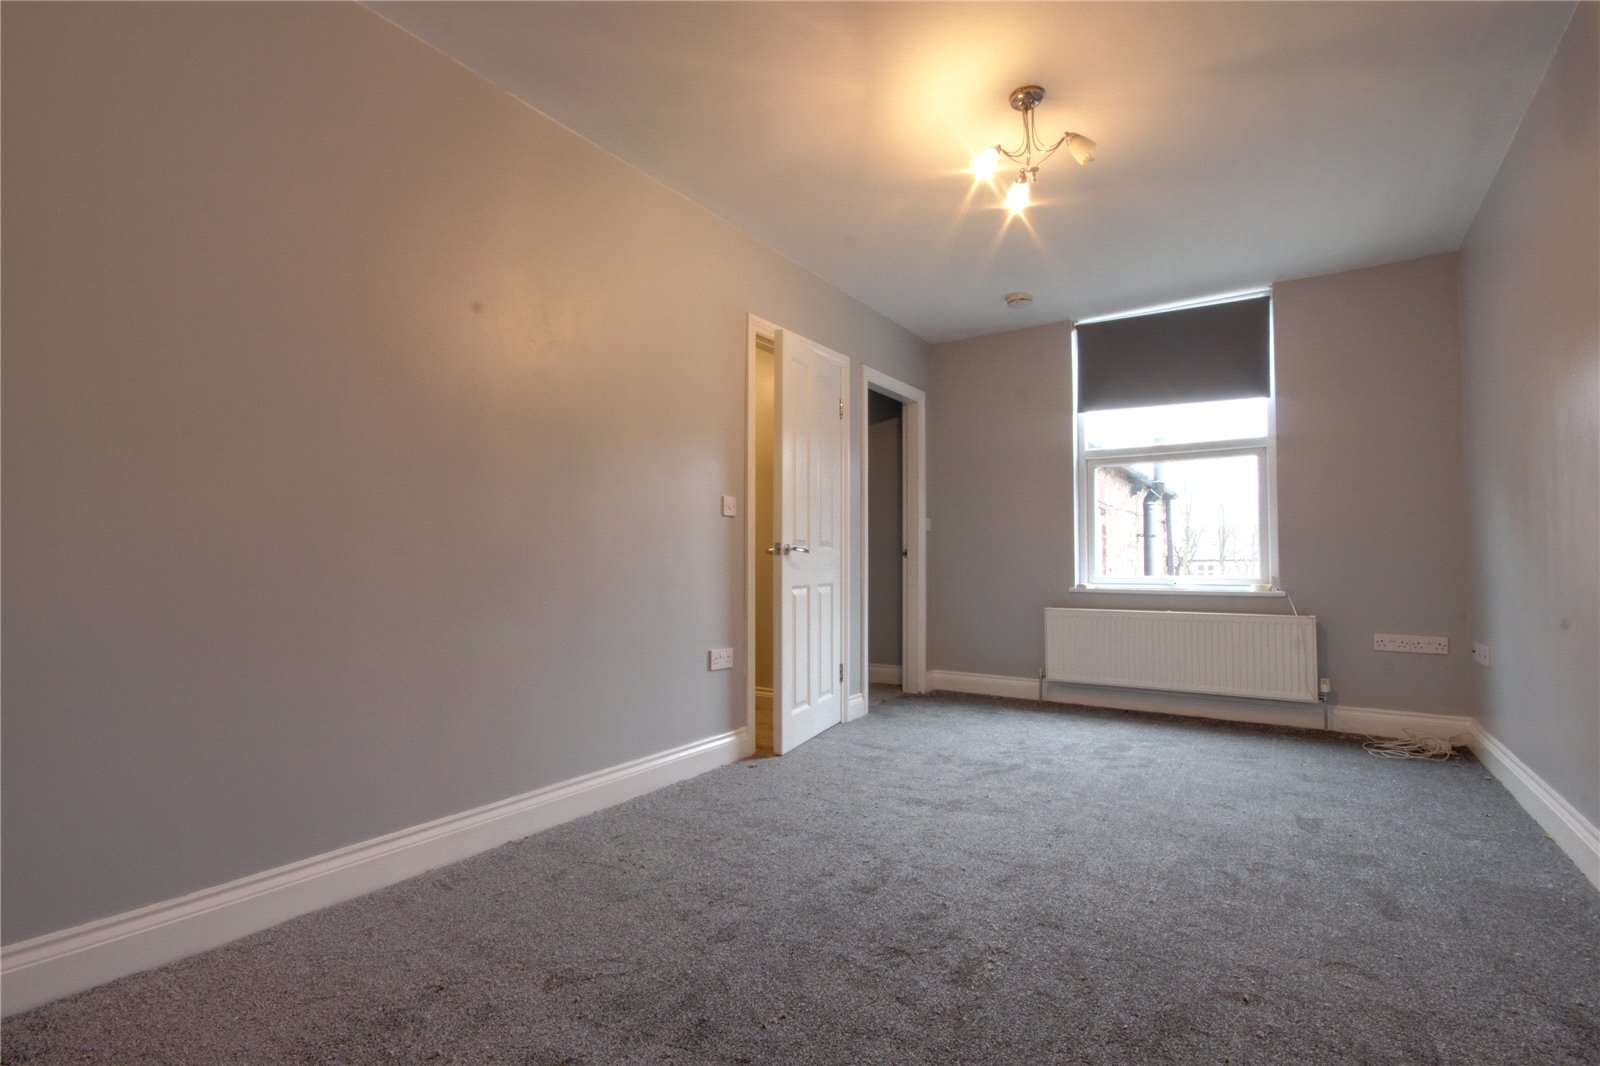 2 bed to rent in Normanby Road, Normanby - Property Image 1